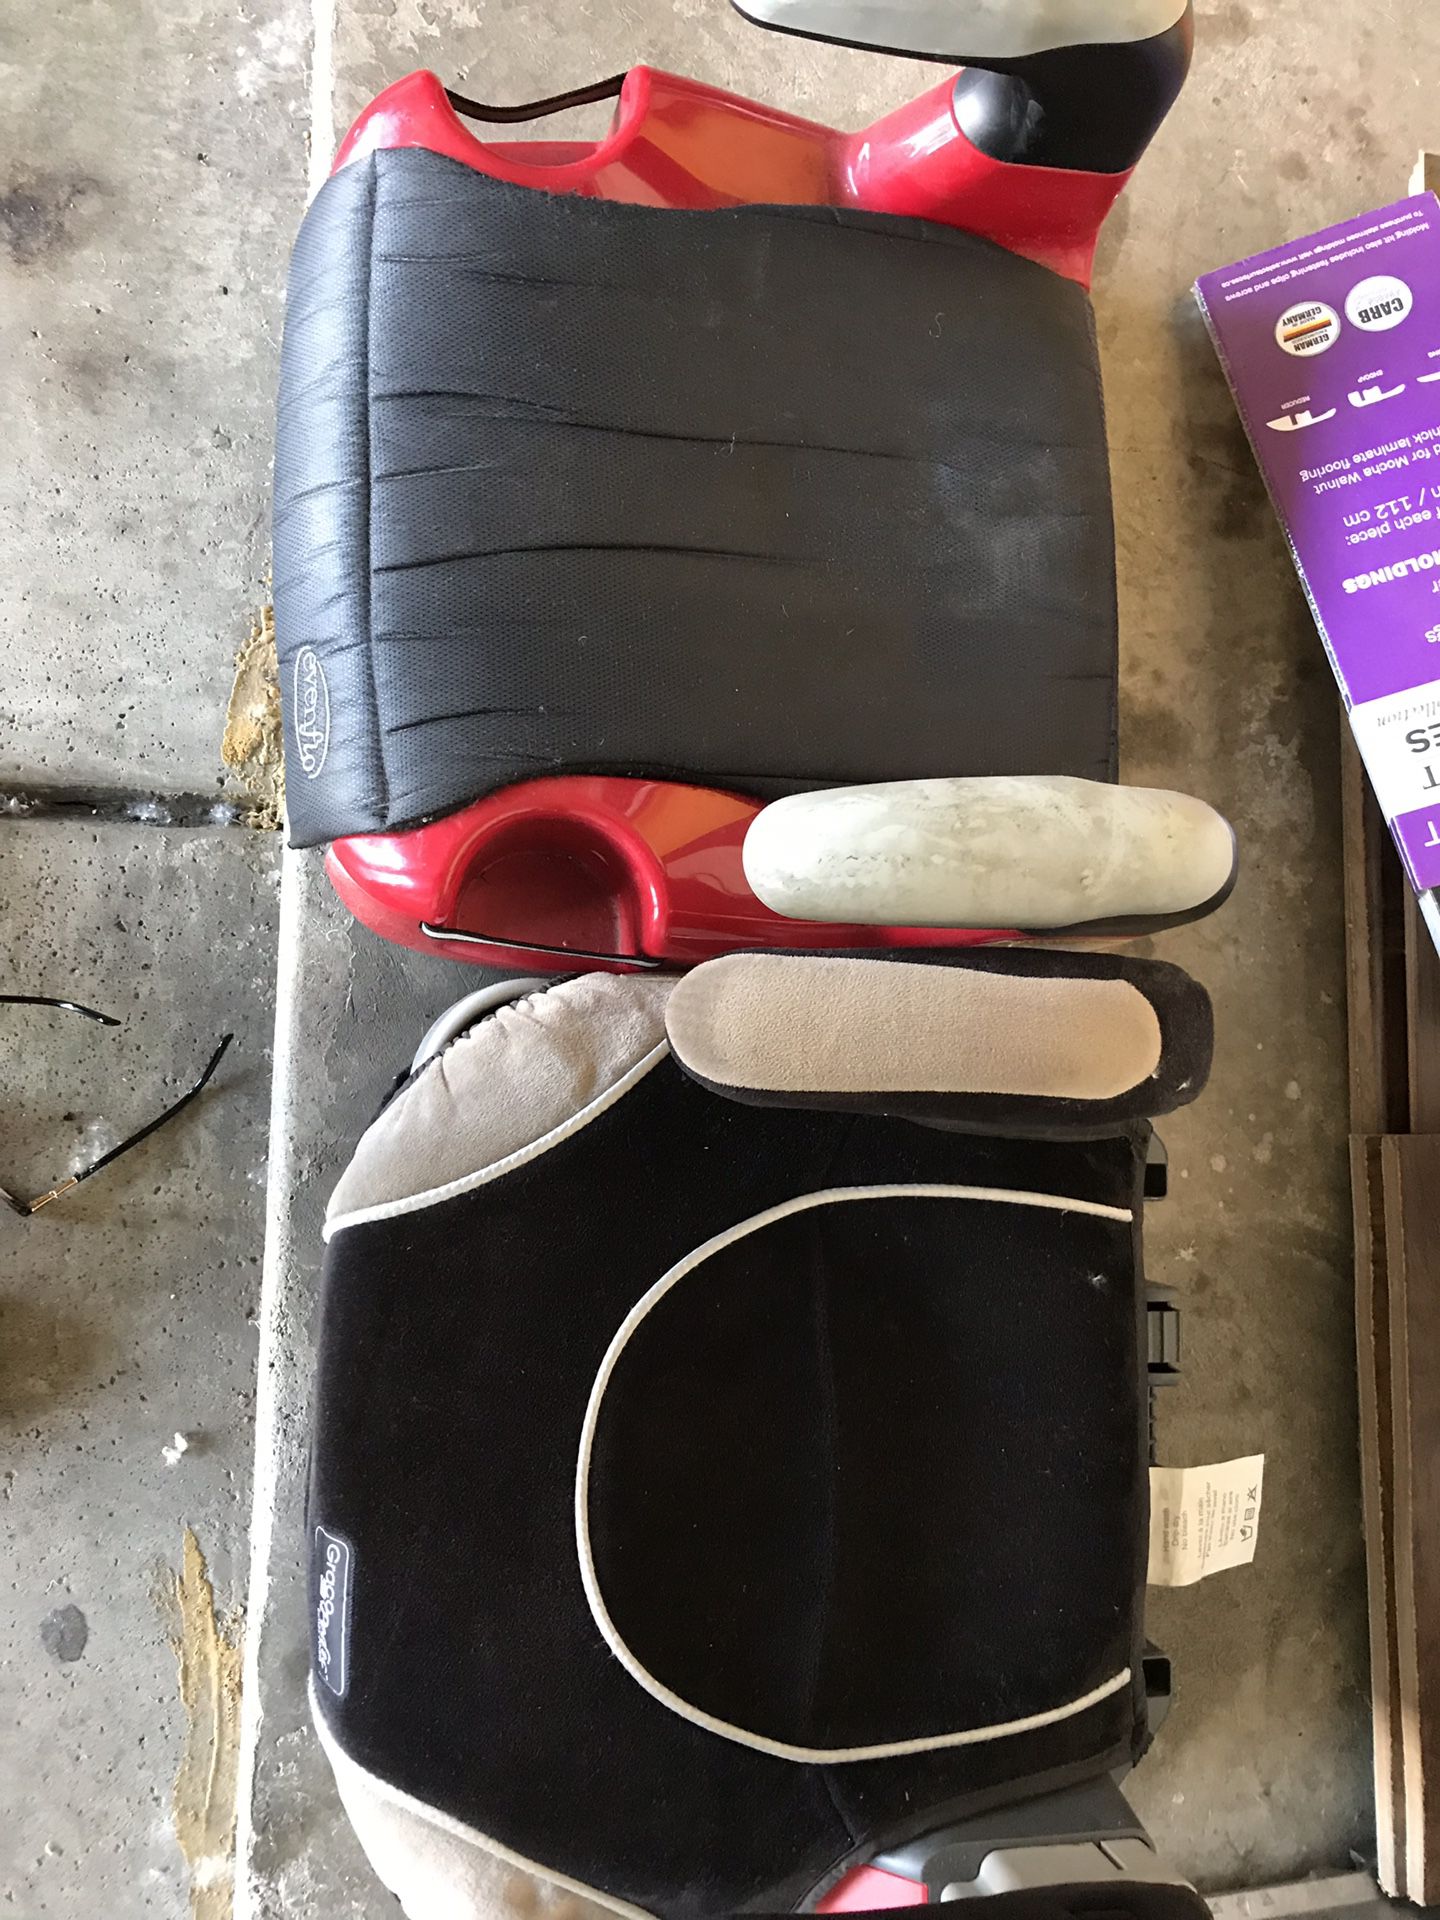 Two car booster seats for toddlers